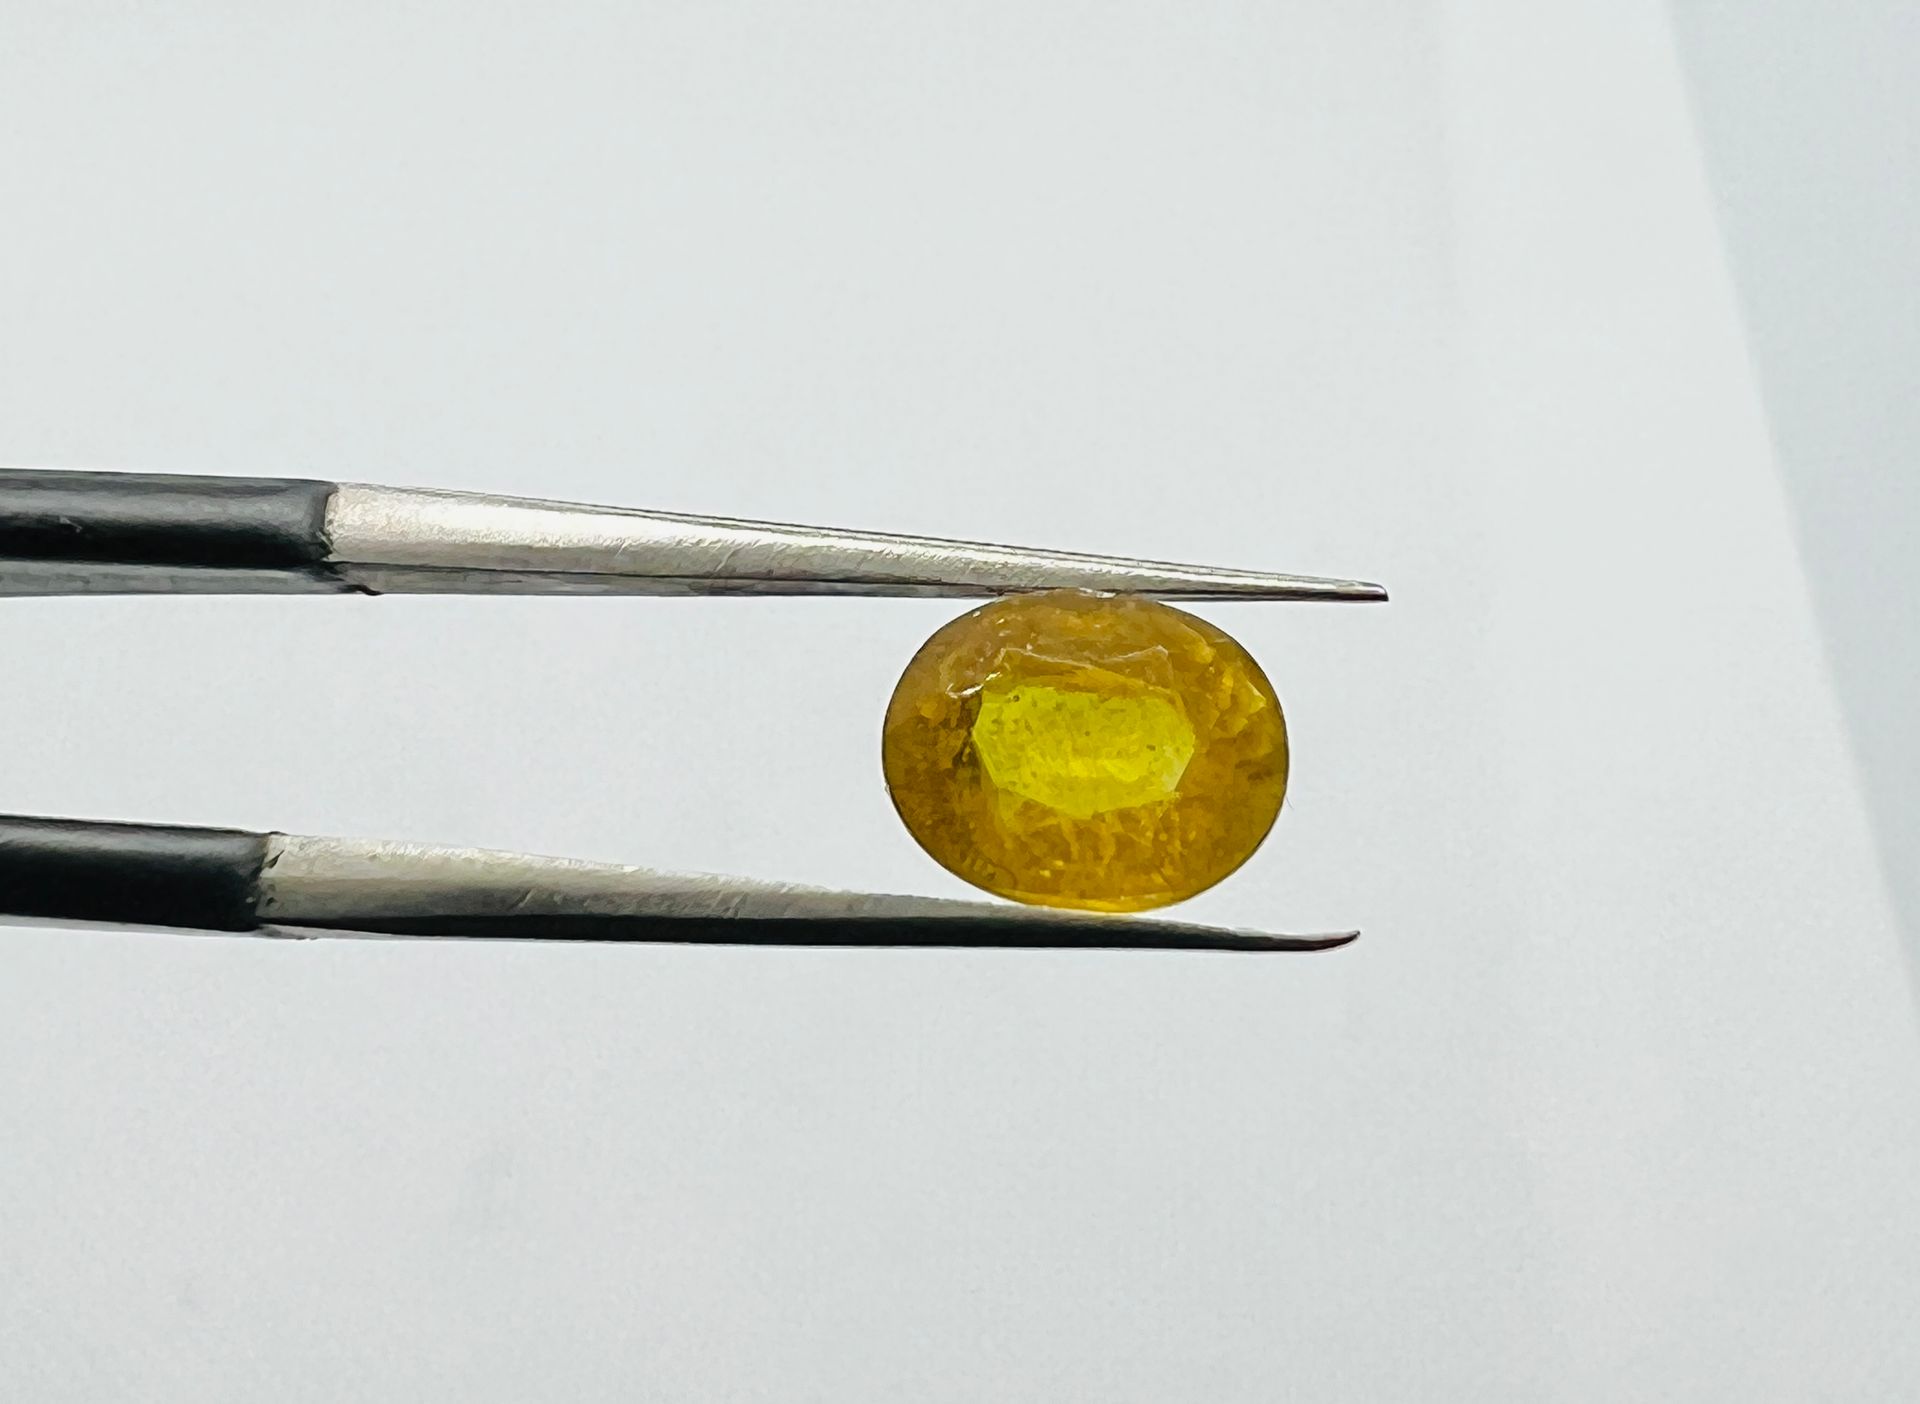 SAPHIRE YELLOW SAPHIRE of 1.82 carats AIGT certificate